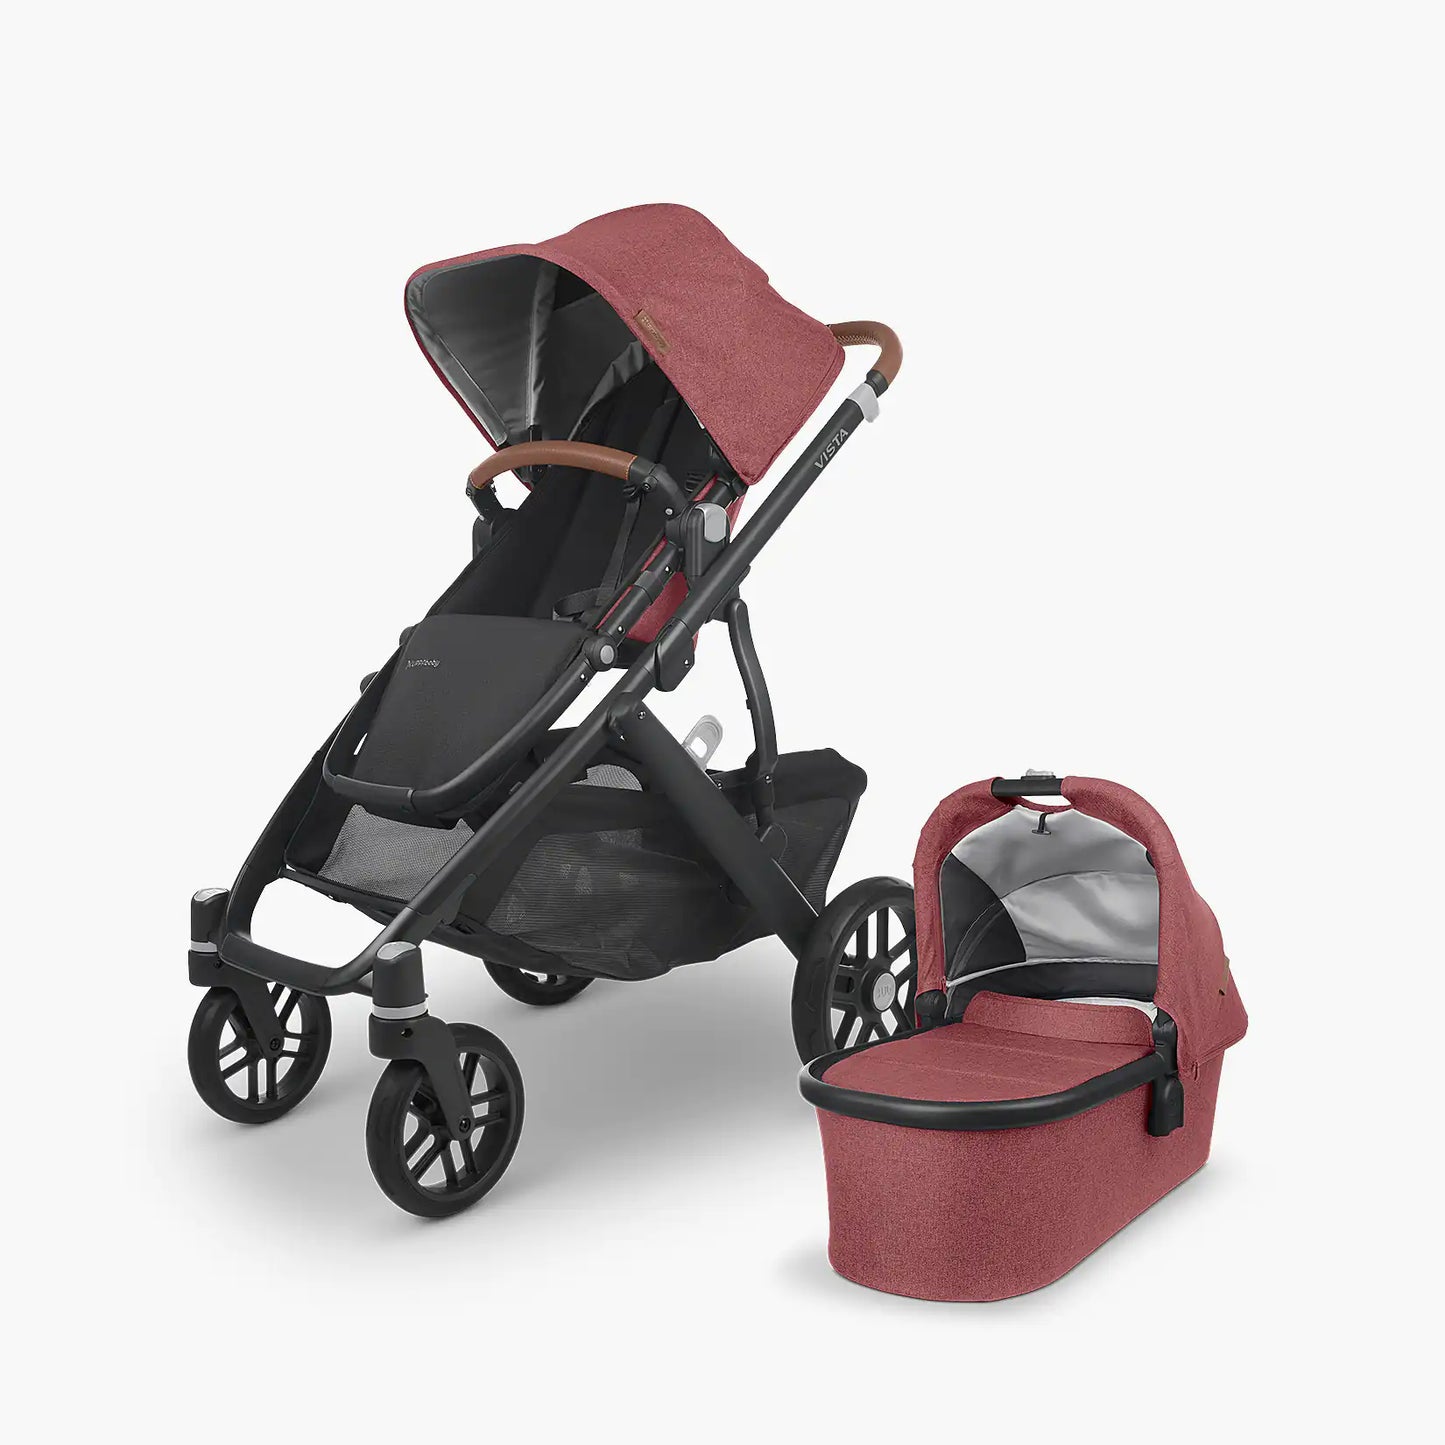 VISTA V2 Stroller - LUCY  - DROPSHIP ITEM - PLEASE ALLOW ONE WEEK FOR PROCESSING